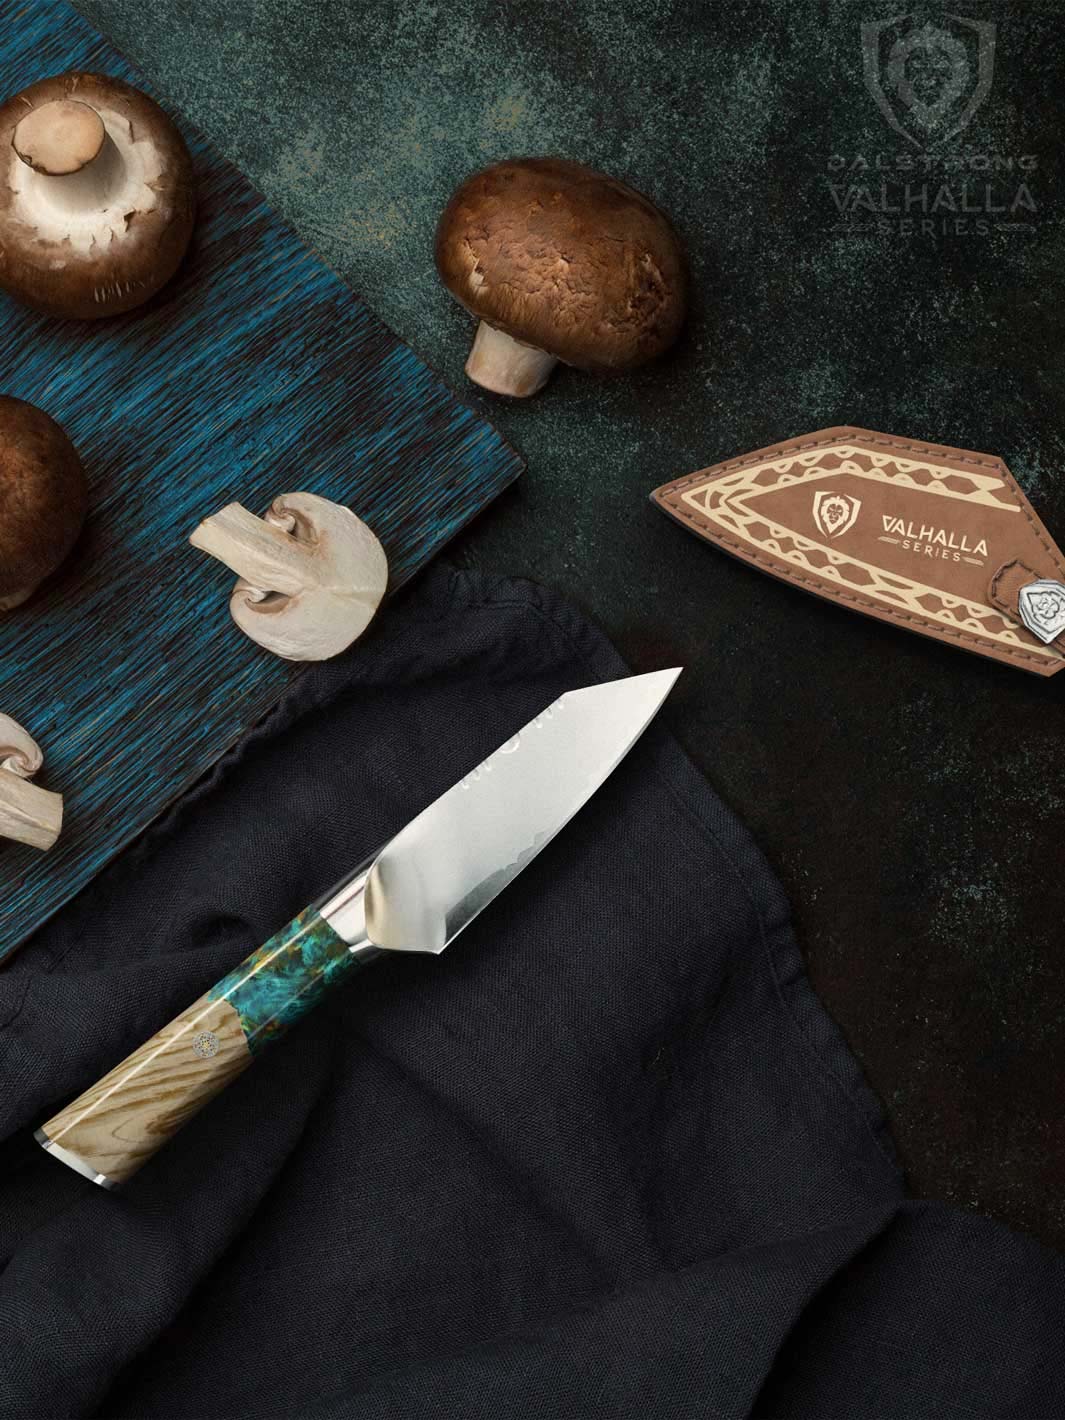 Dalstrong valhalla series 4 inch paring knife with wooden handle beside some mushrooms.